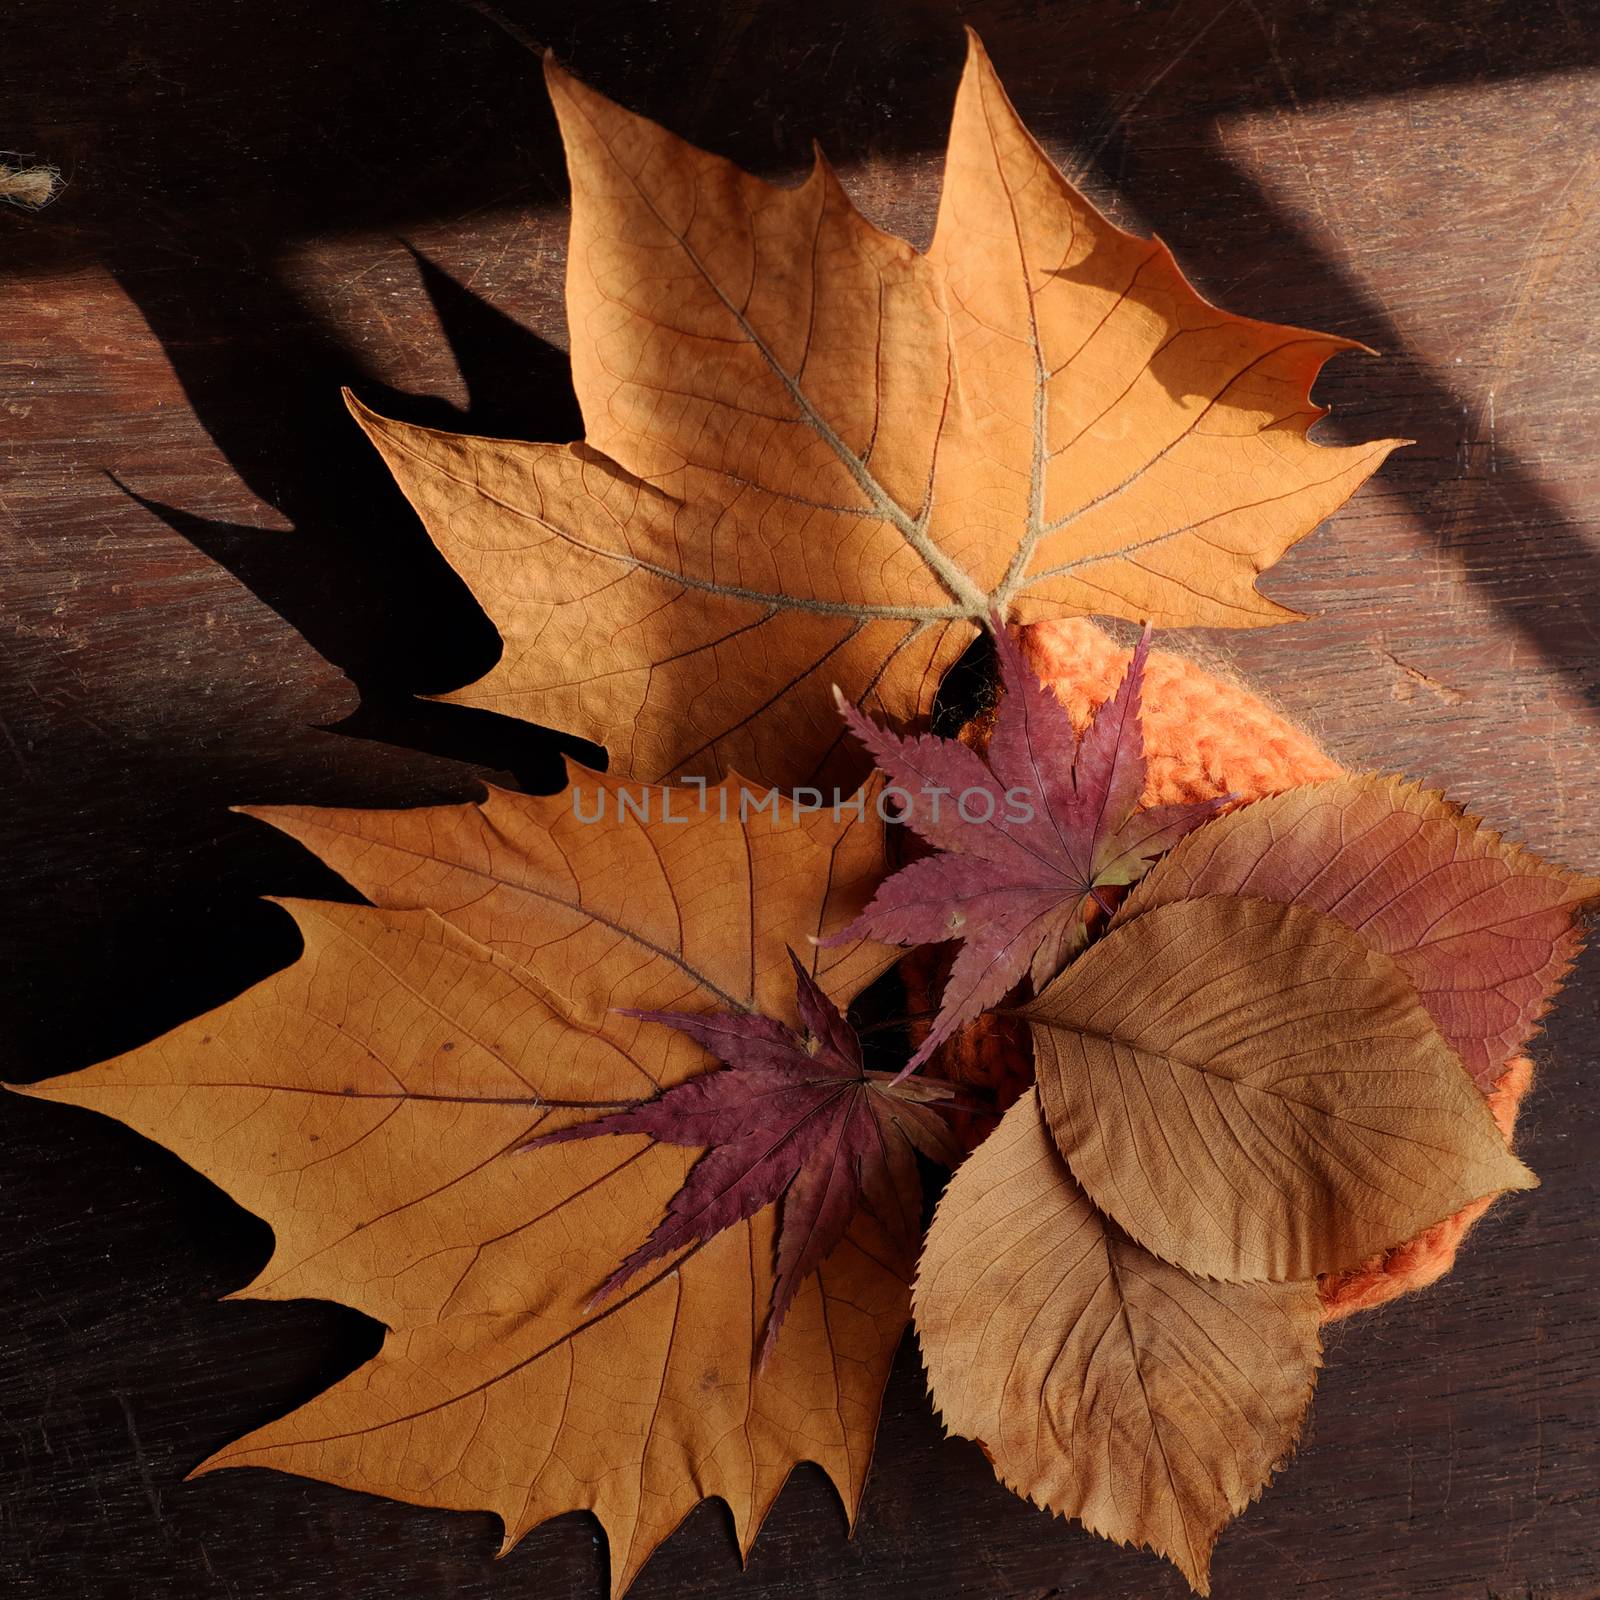 Thanksgiving background with dried maple leaf on wood background, nice leaves in autumn season